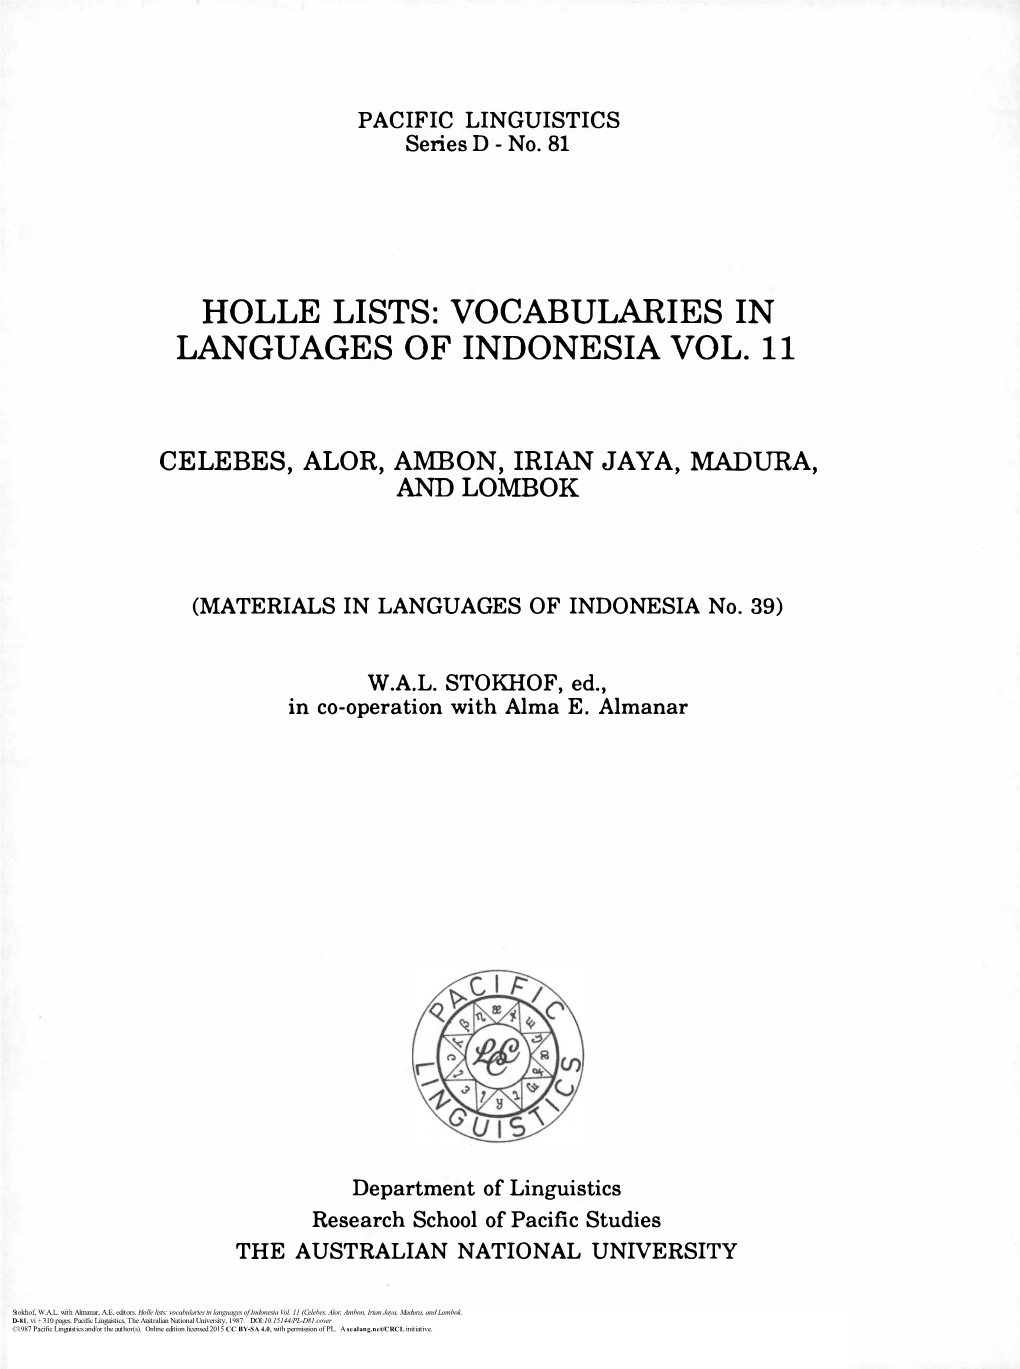 Holle Lists: Vocabularies in Languages of Indonesia Vol. 11 (Celebes, Alor, Ambon, Irian Jaya, Madura, and Lombok